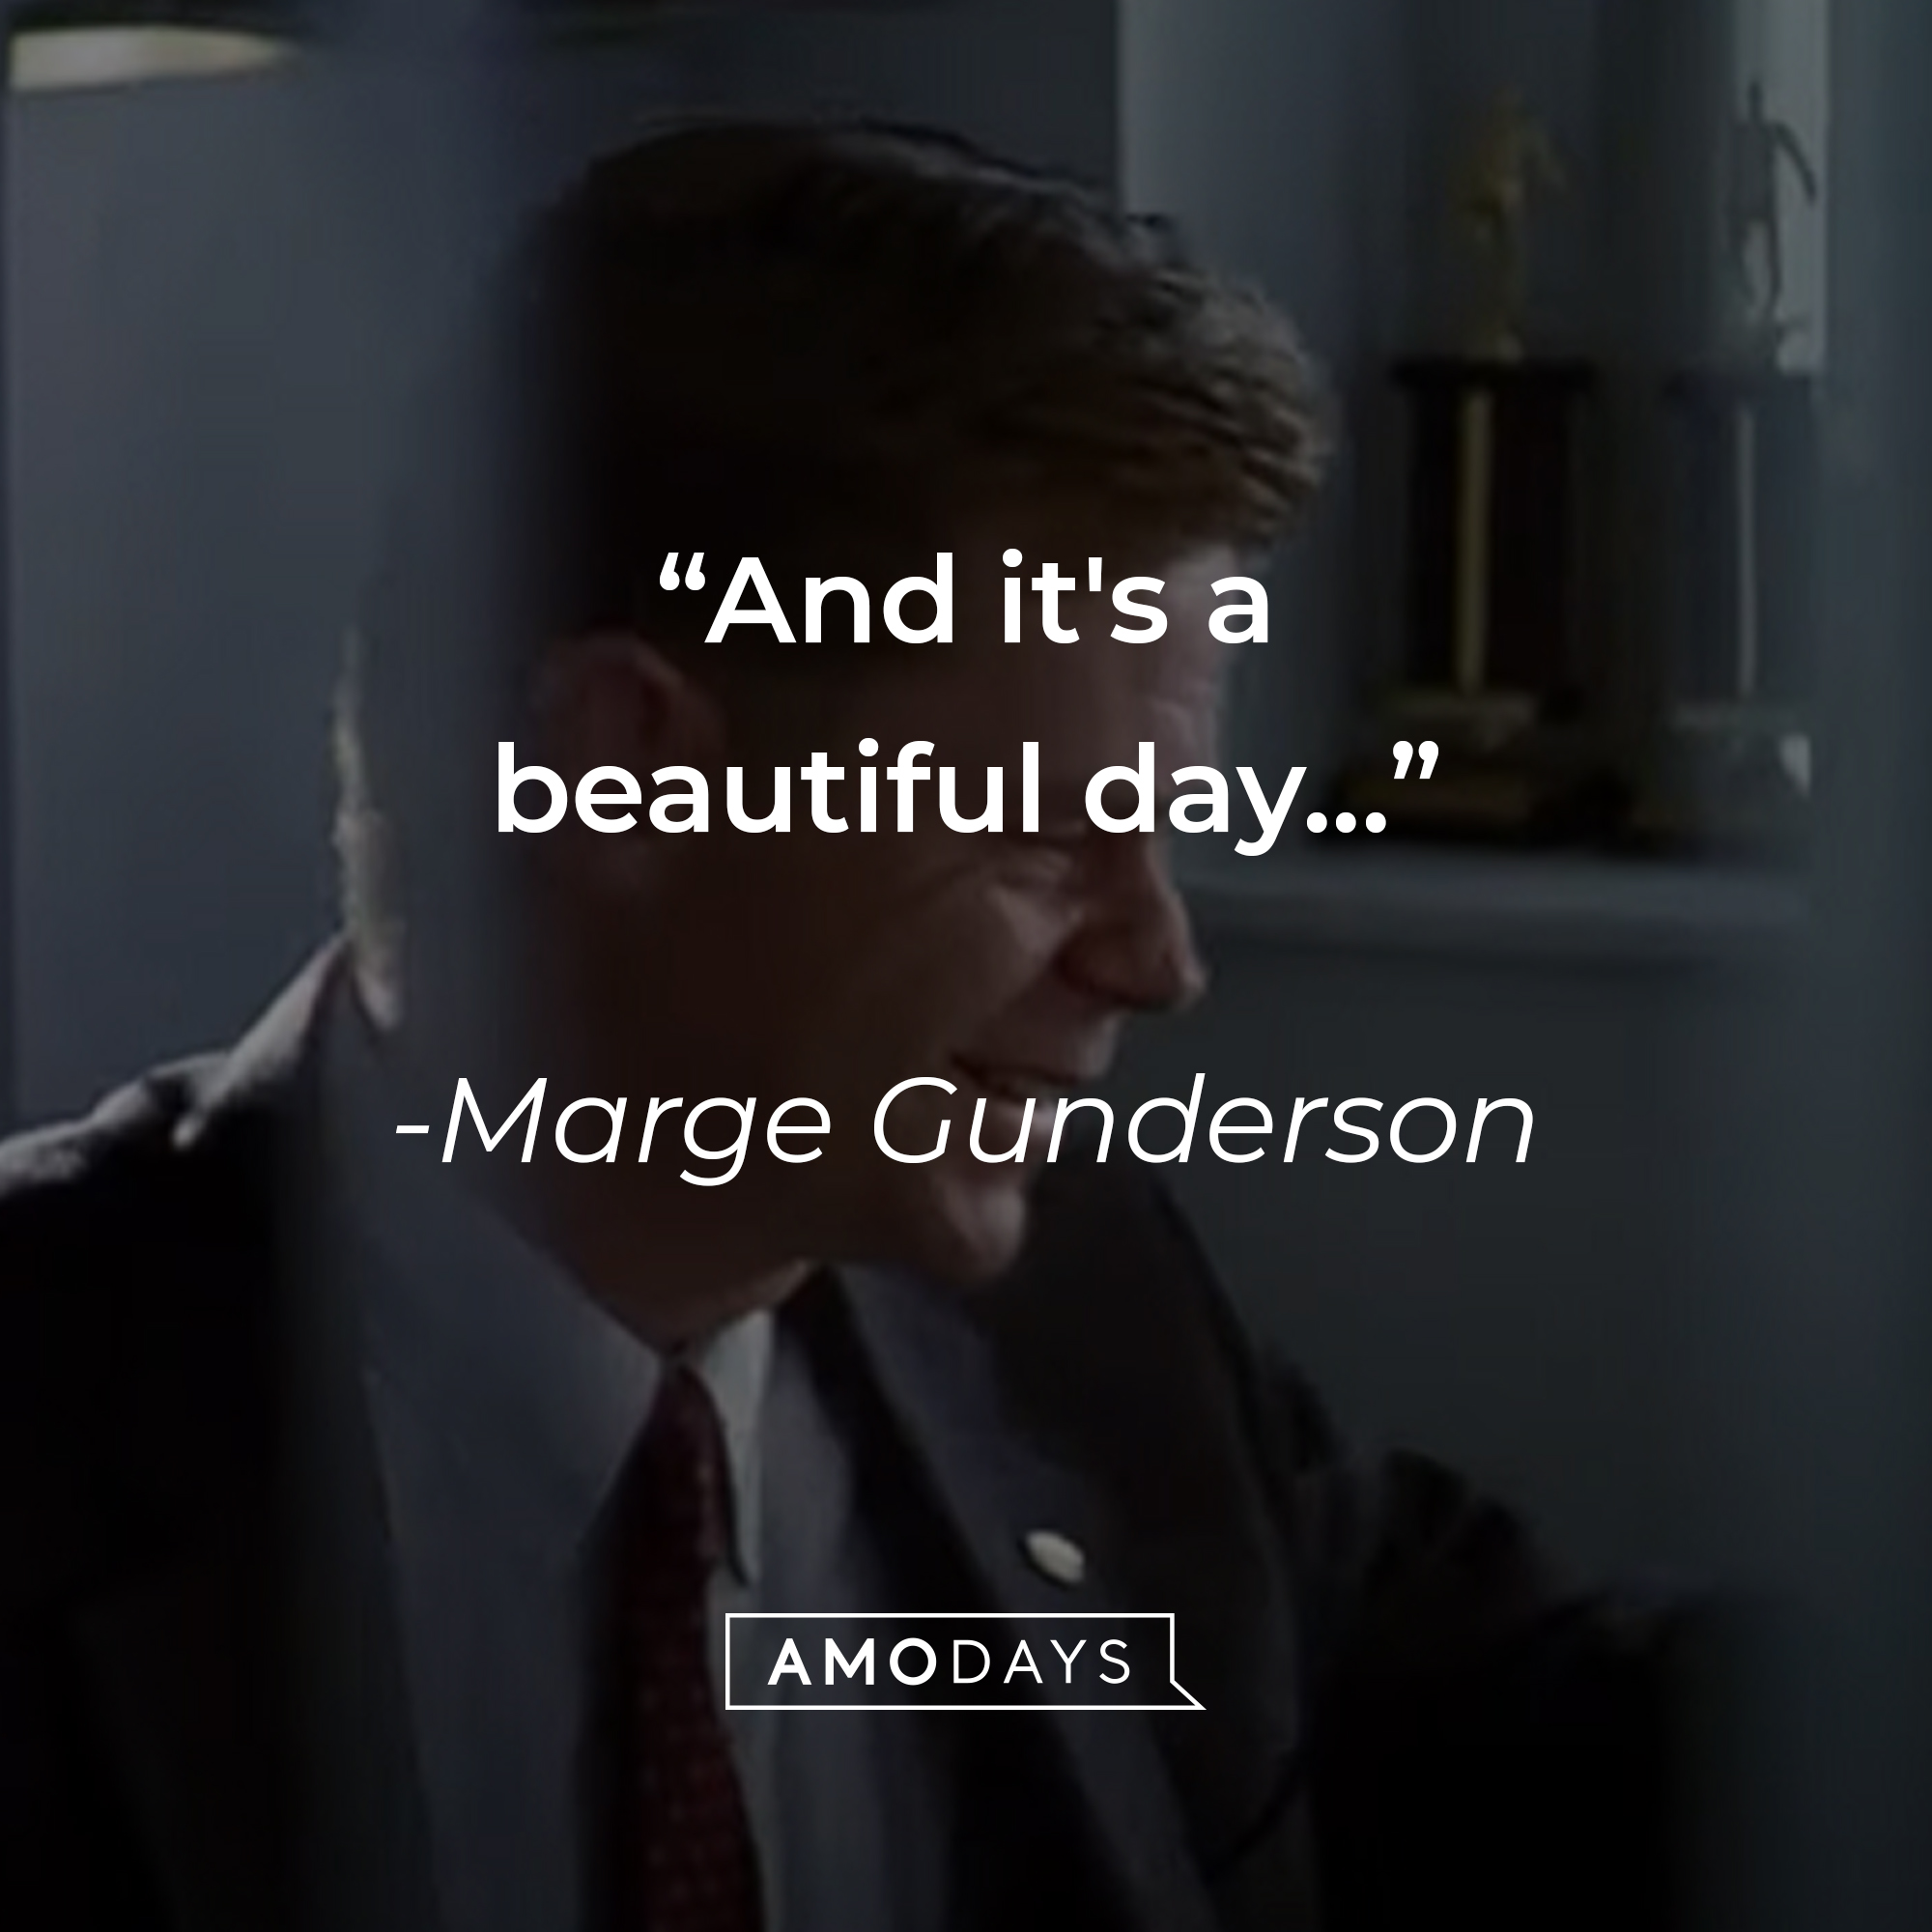 Marge Gunderson's quote: "And it's a beautiful day..." | Source: youtube.com/MGMStudios